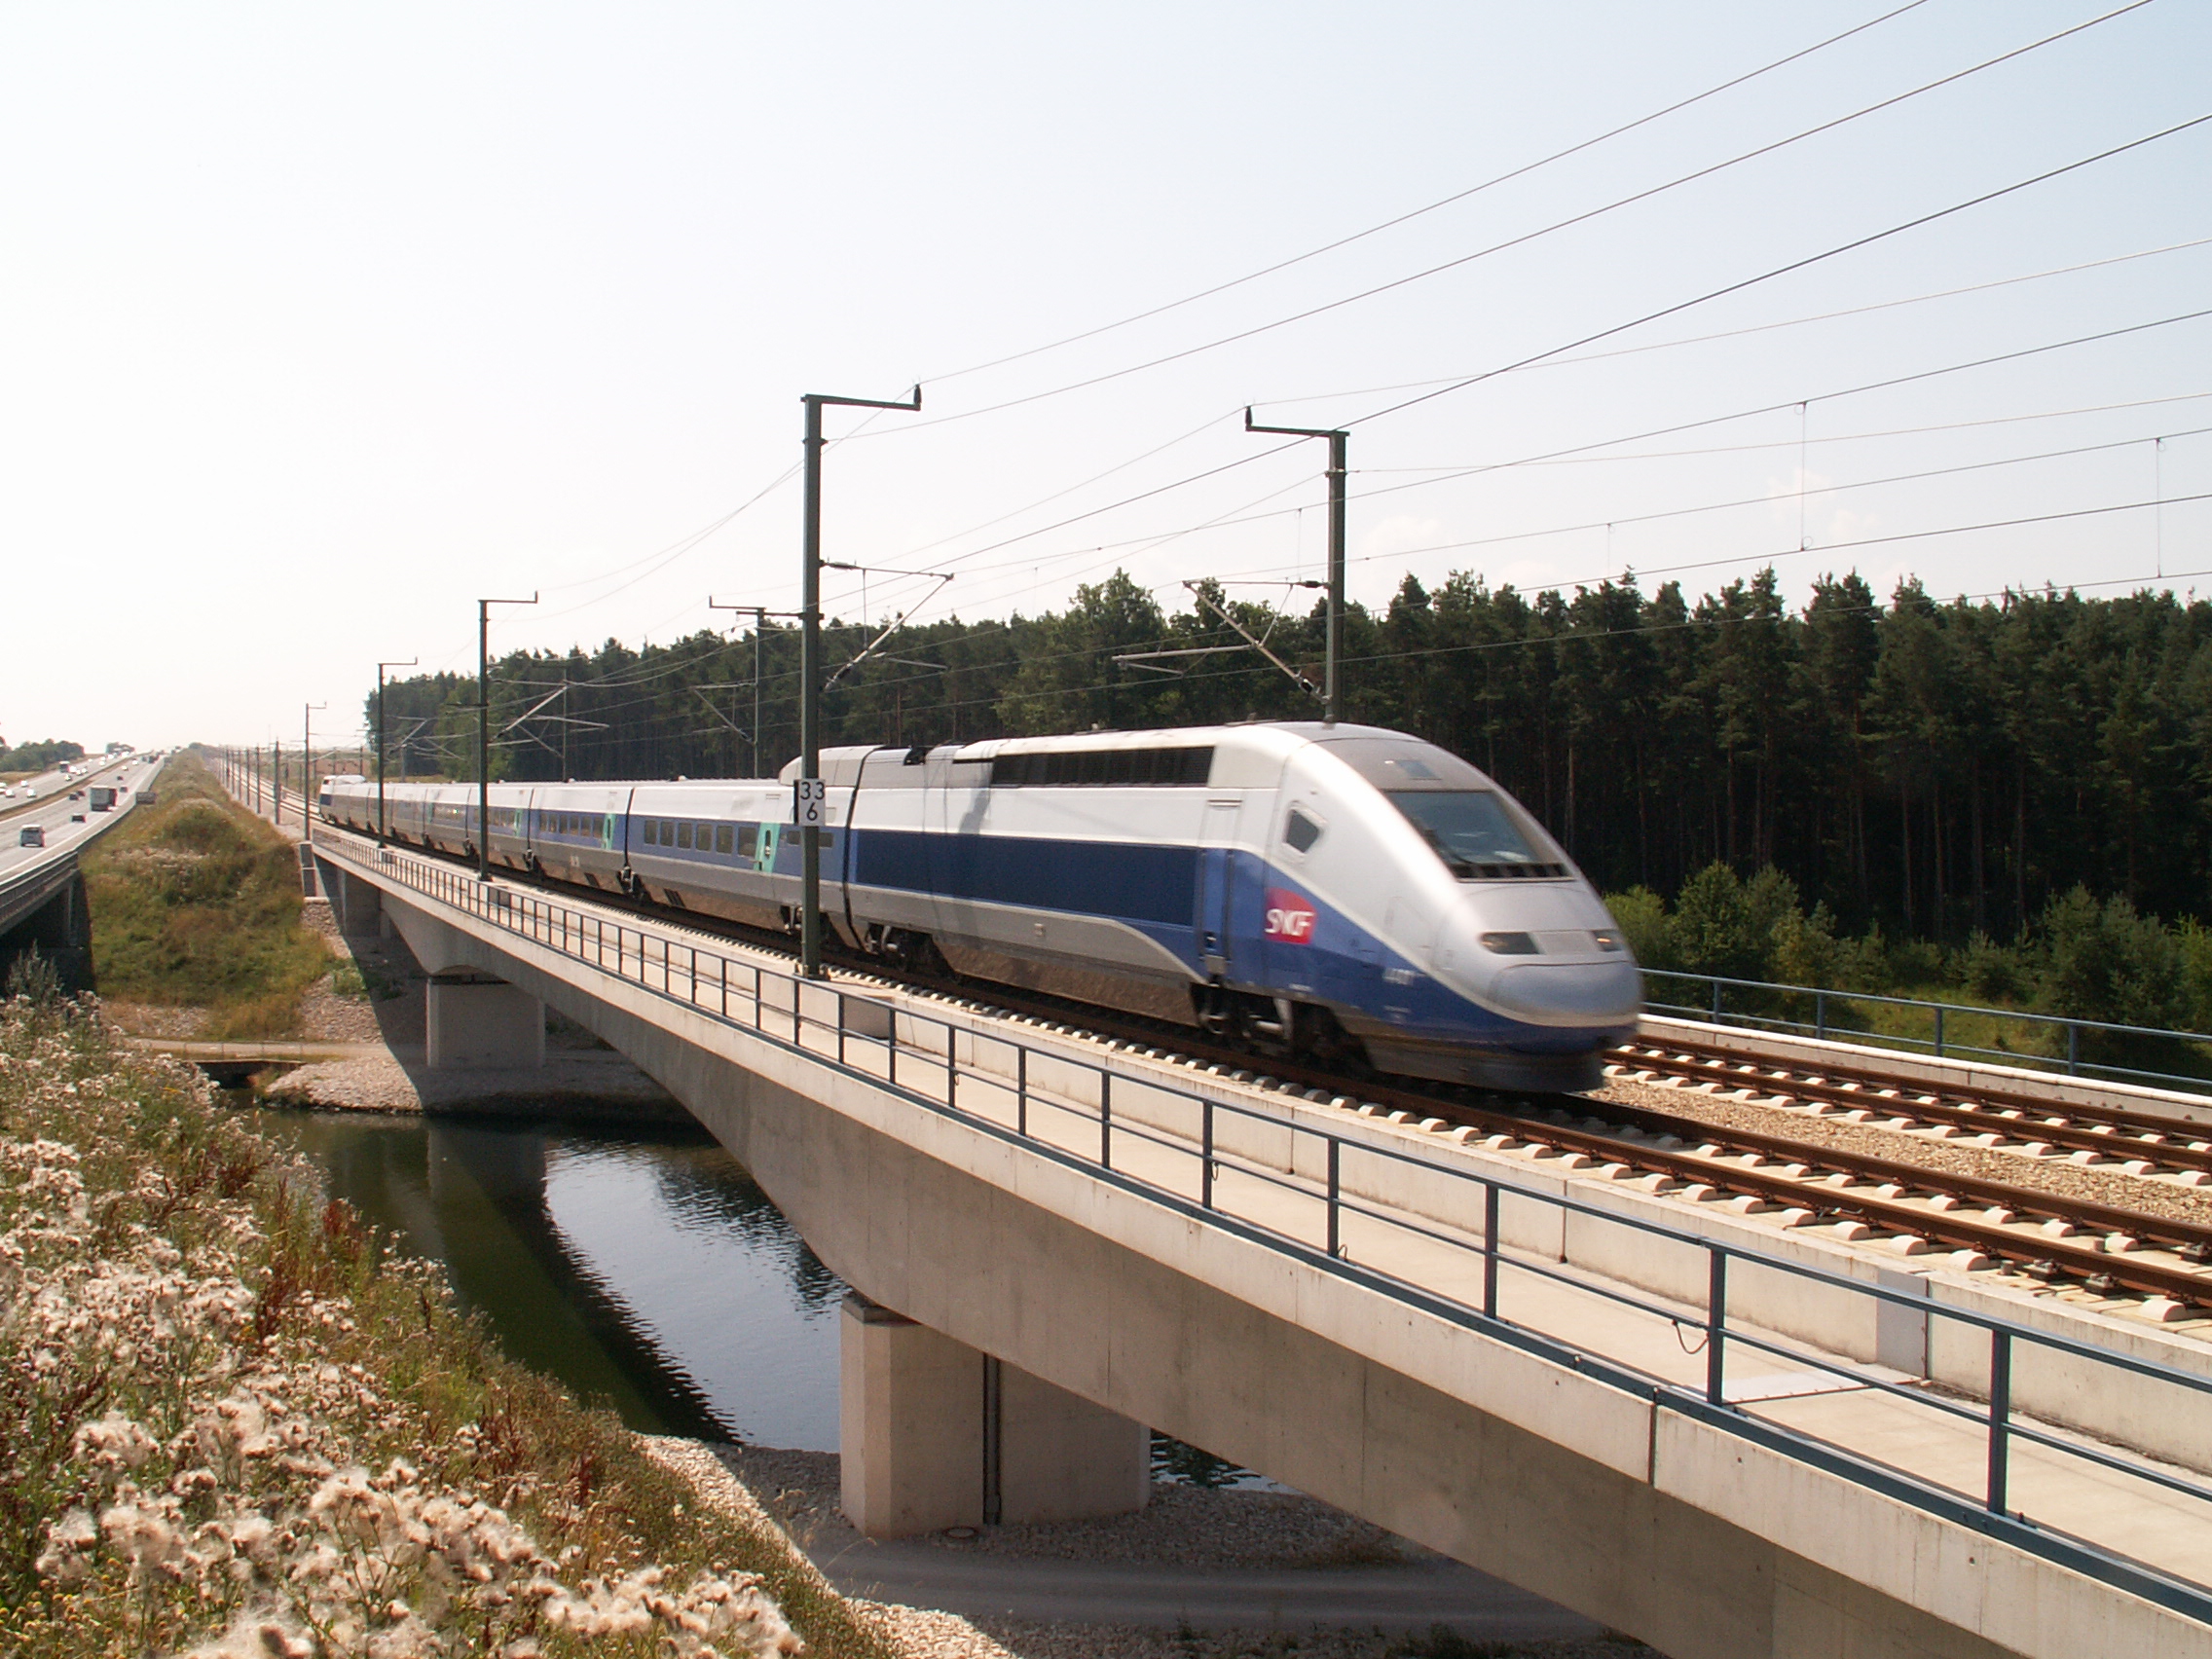 France's TGV, similar to what will eventually run in California, runs under wire and uses carbon-free electricity. Photo: Wikimedia Commons